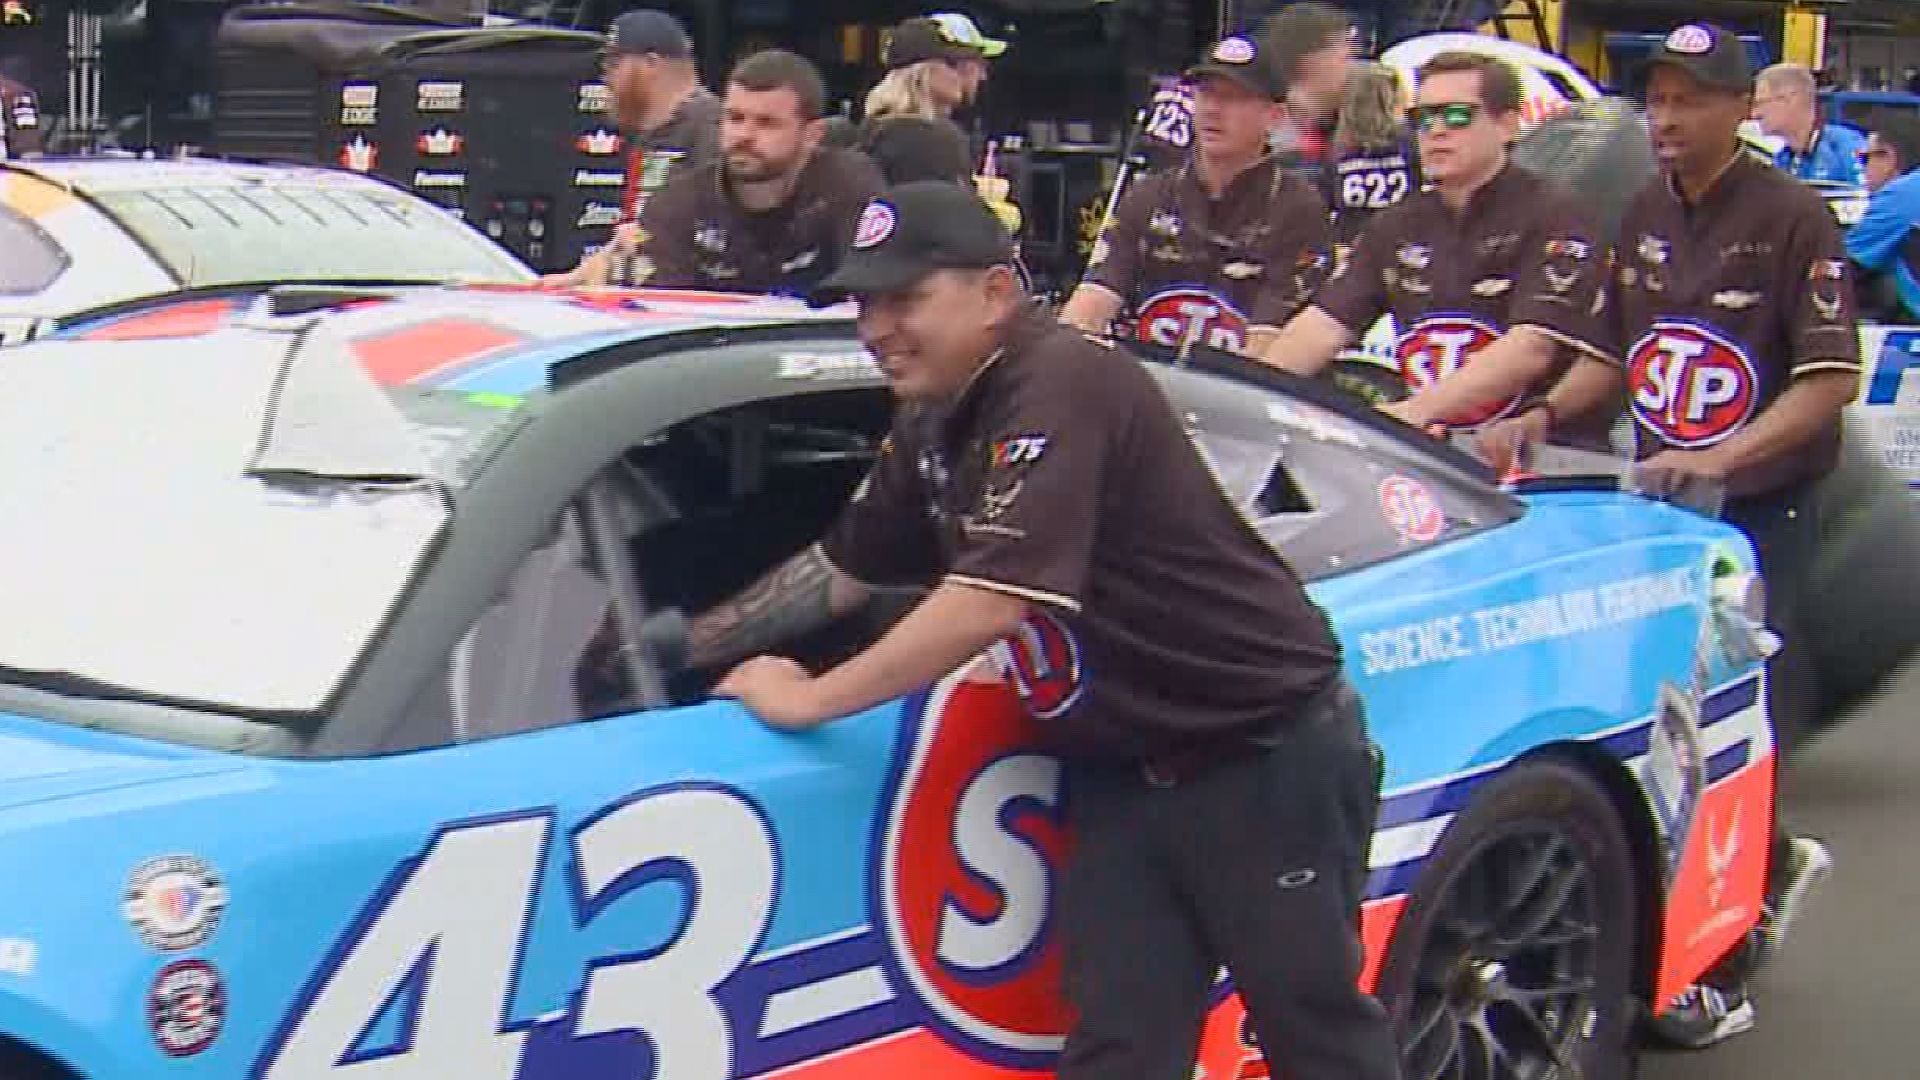 It's been nearly a decade since Nascar pit crews faced off against each other.